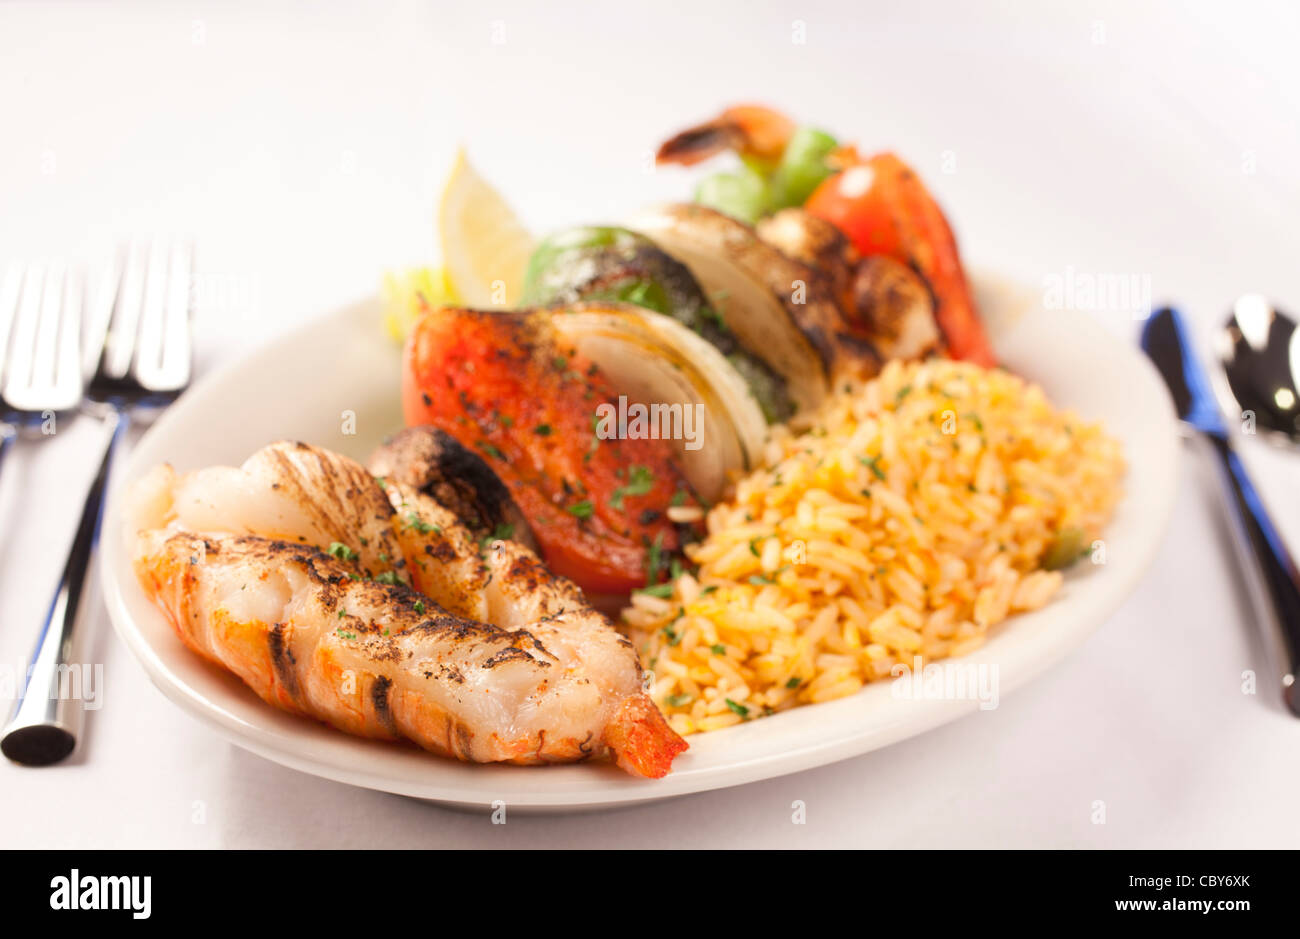 A Lobster kabob dish served wit ha side of rice, River Room Restaurant Stock Photo